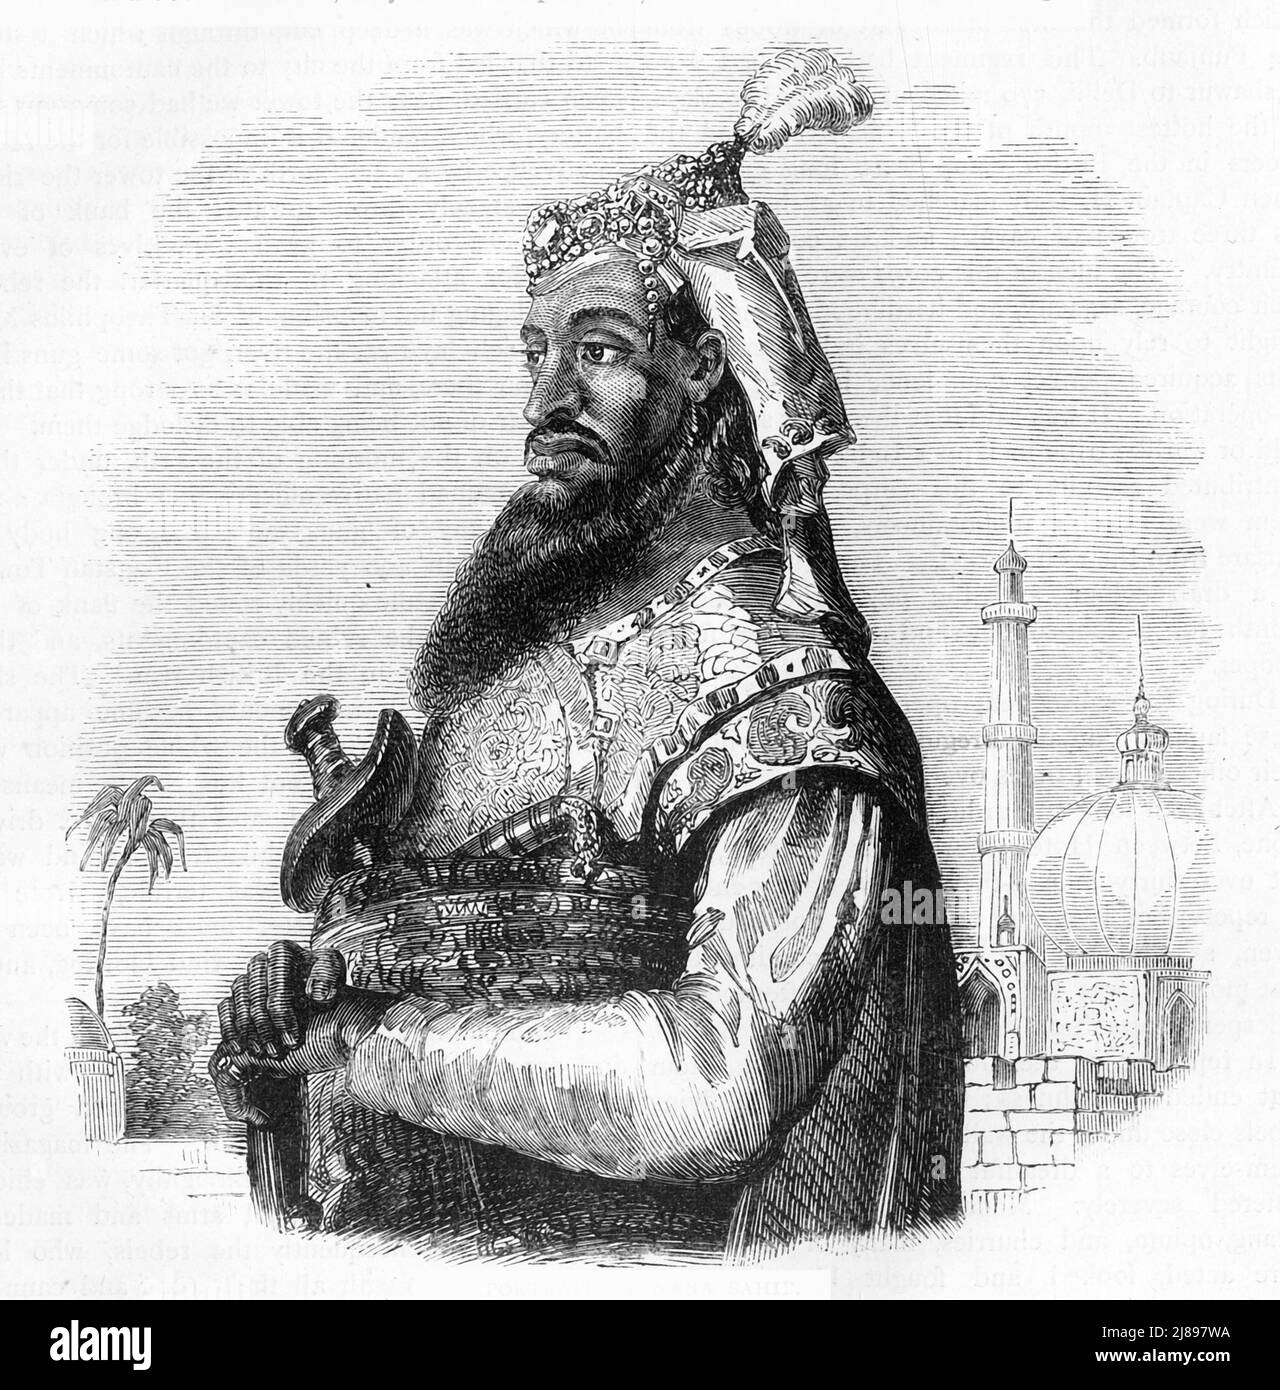 'Portrait of Nana Sahib', c1891. From &quot;Cassell's Illustrated History of India Vol. II.&quot;, by James Grant. [Cassell Petter &amp; Galpin, London, Paris and New York] Stock Photo